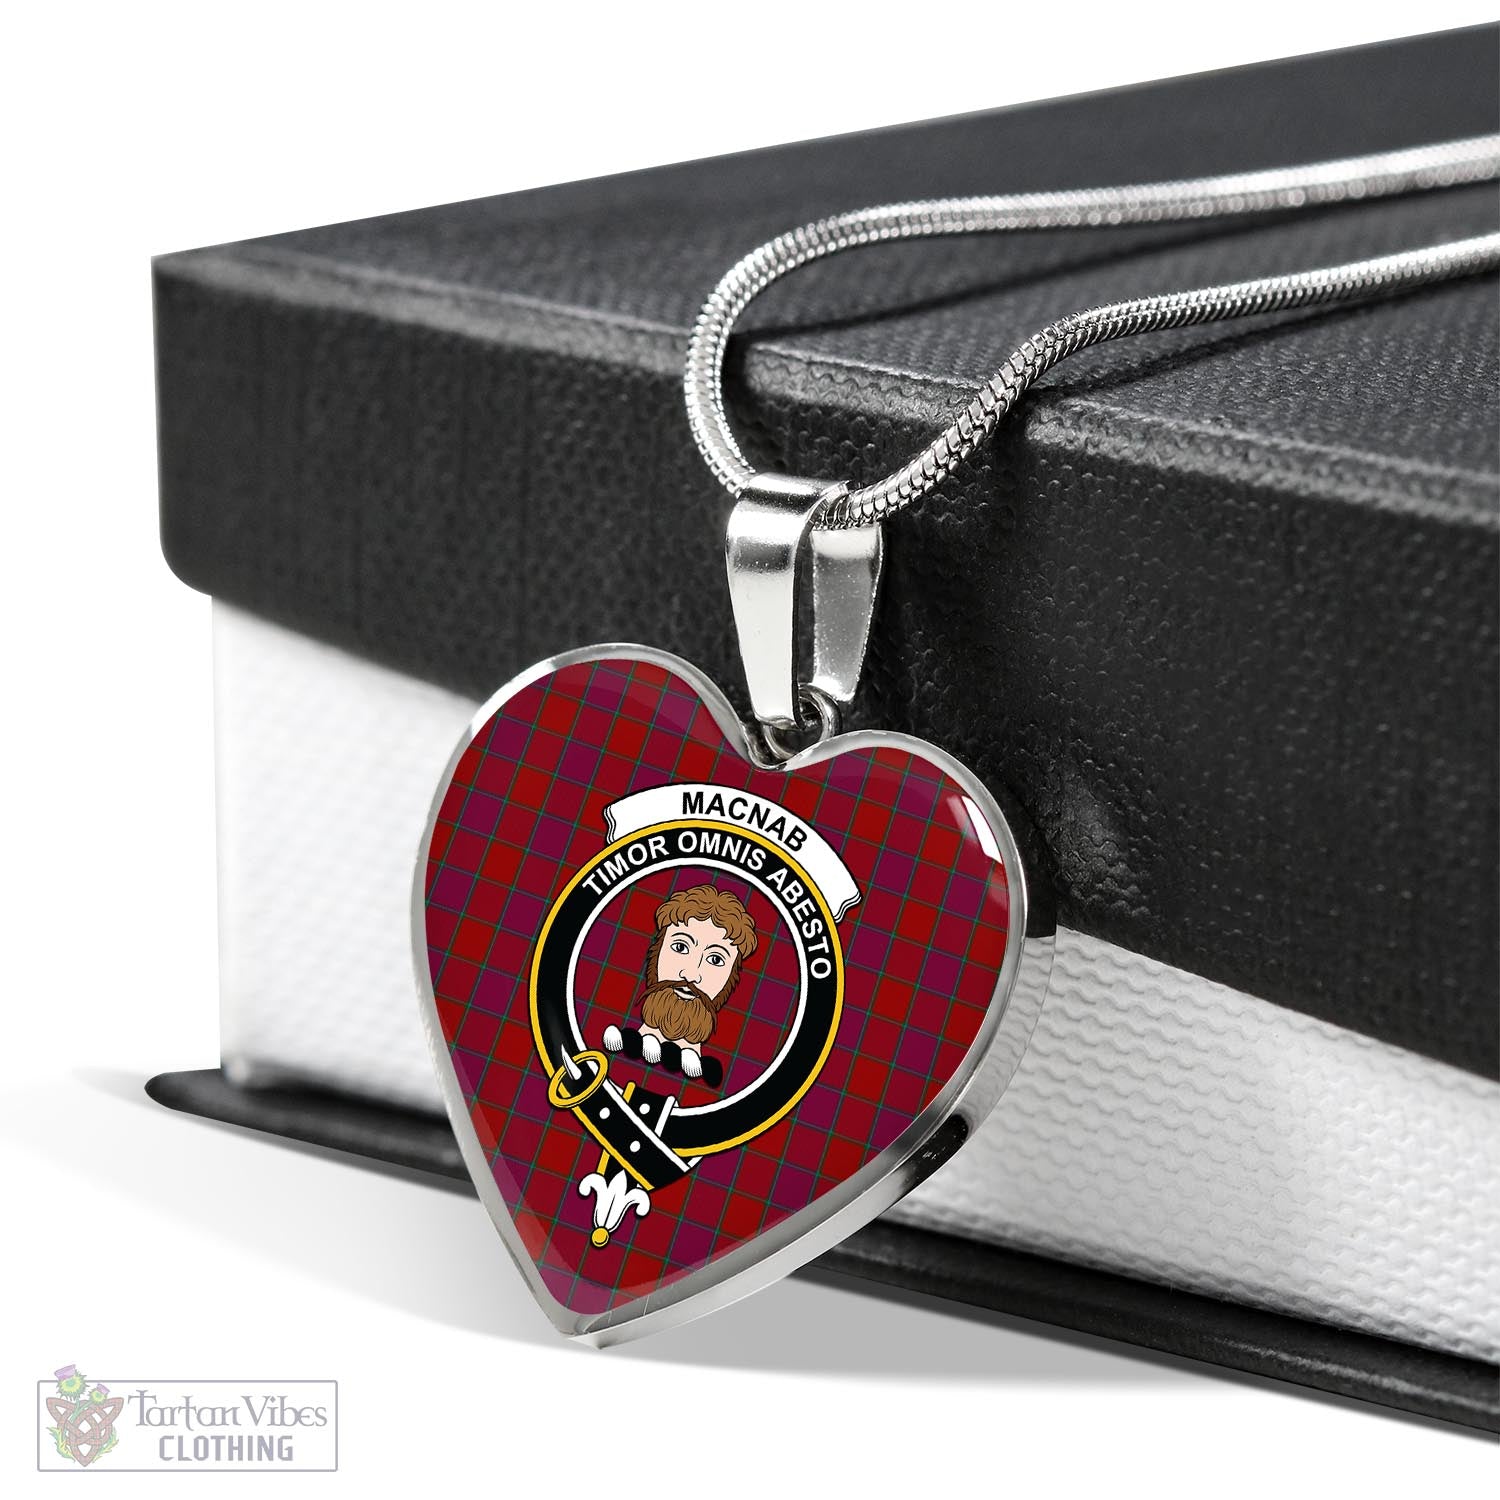 Tartan Vibes Clothing MacNab Old Tartan Heart Necklace with Family Crest